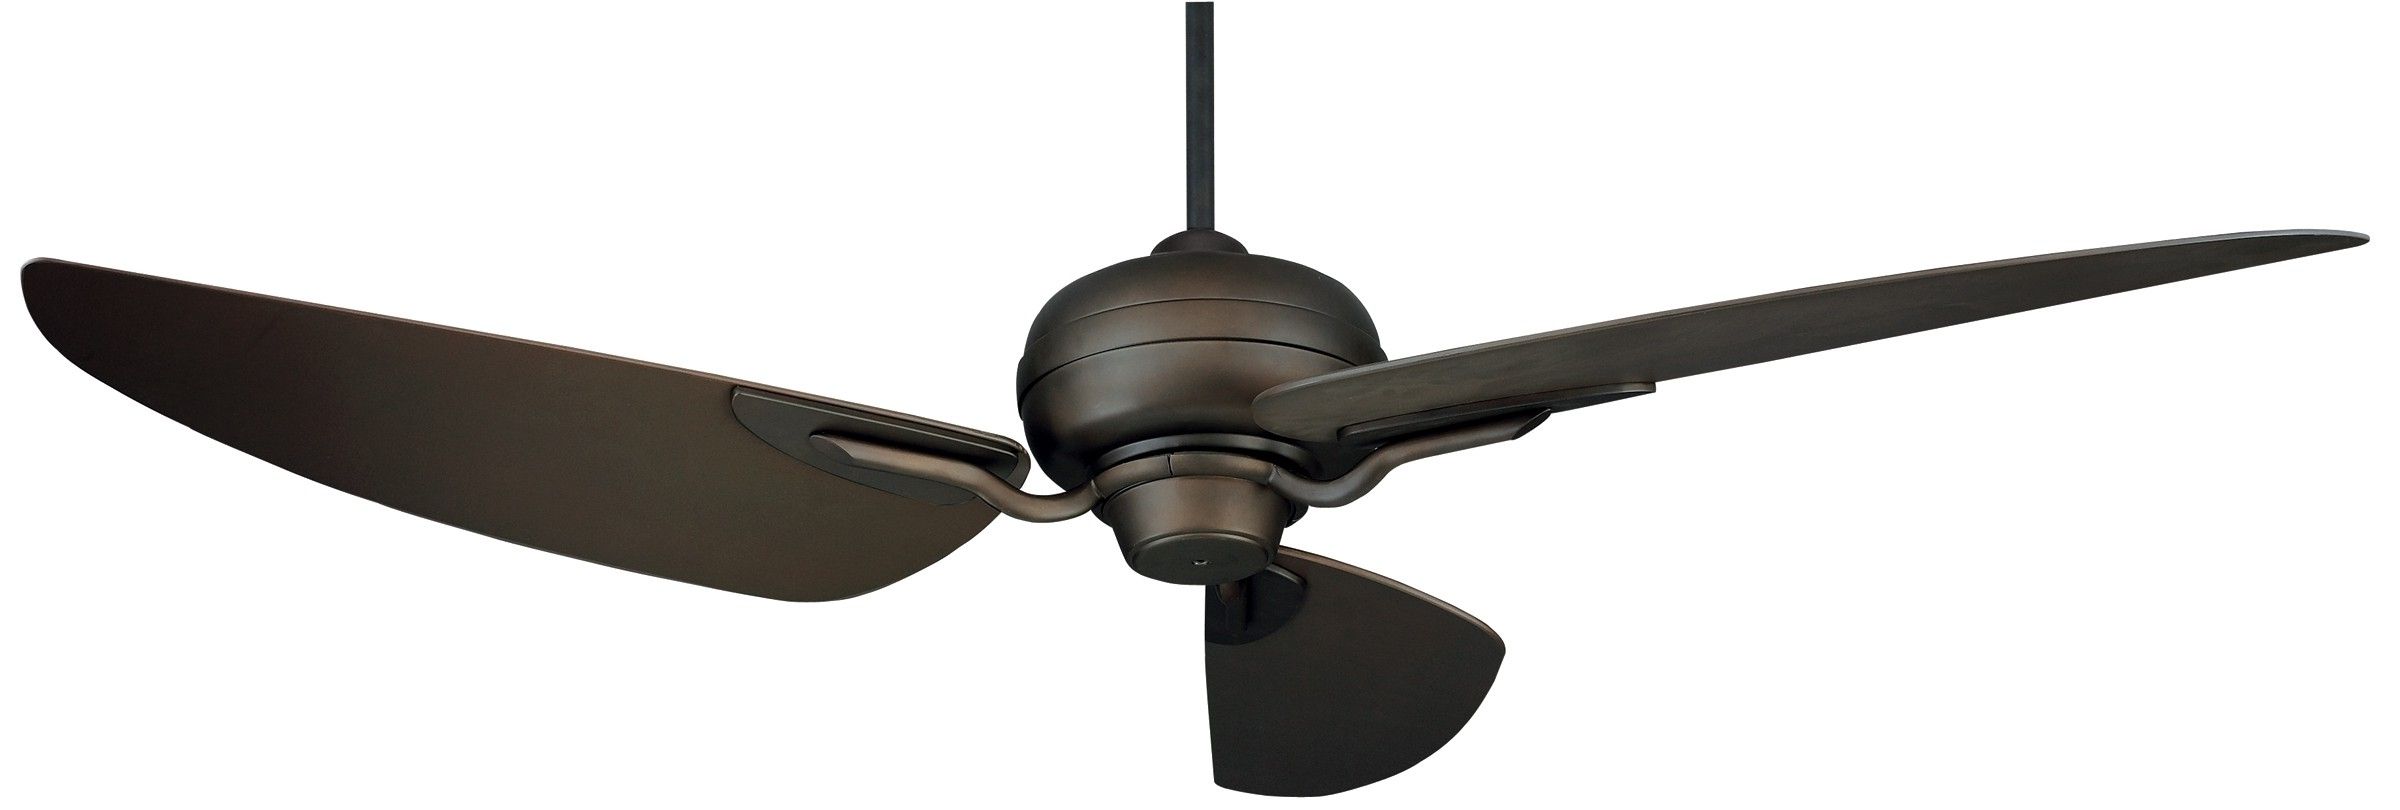 Waterproof Outdoor Ceiling Fans Throughout Current Ceiling: Outstanding Wet Rated Outdoor Ceiling Fans Best Outdoor (View 7 of 20)